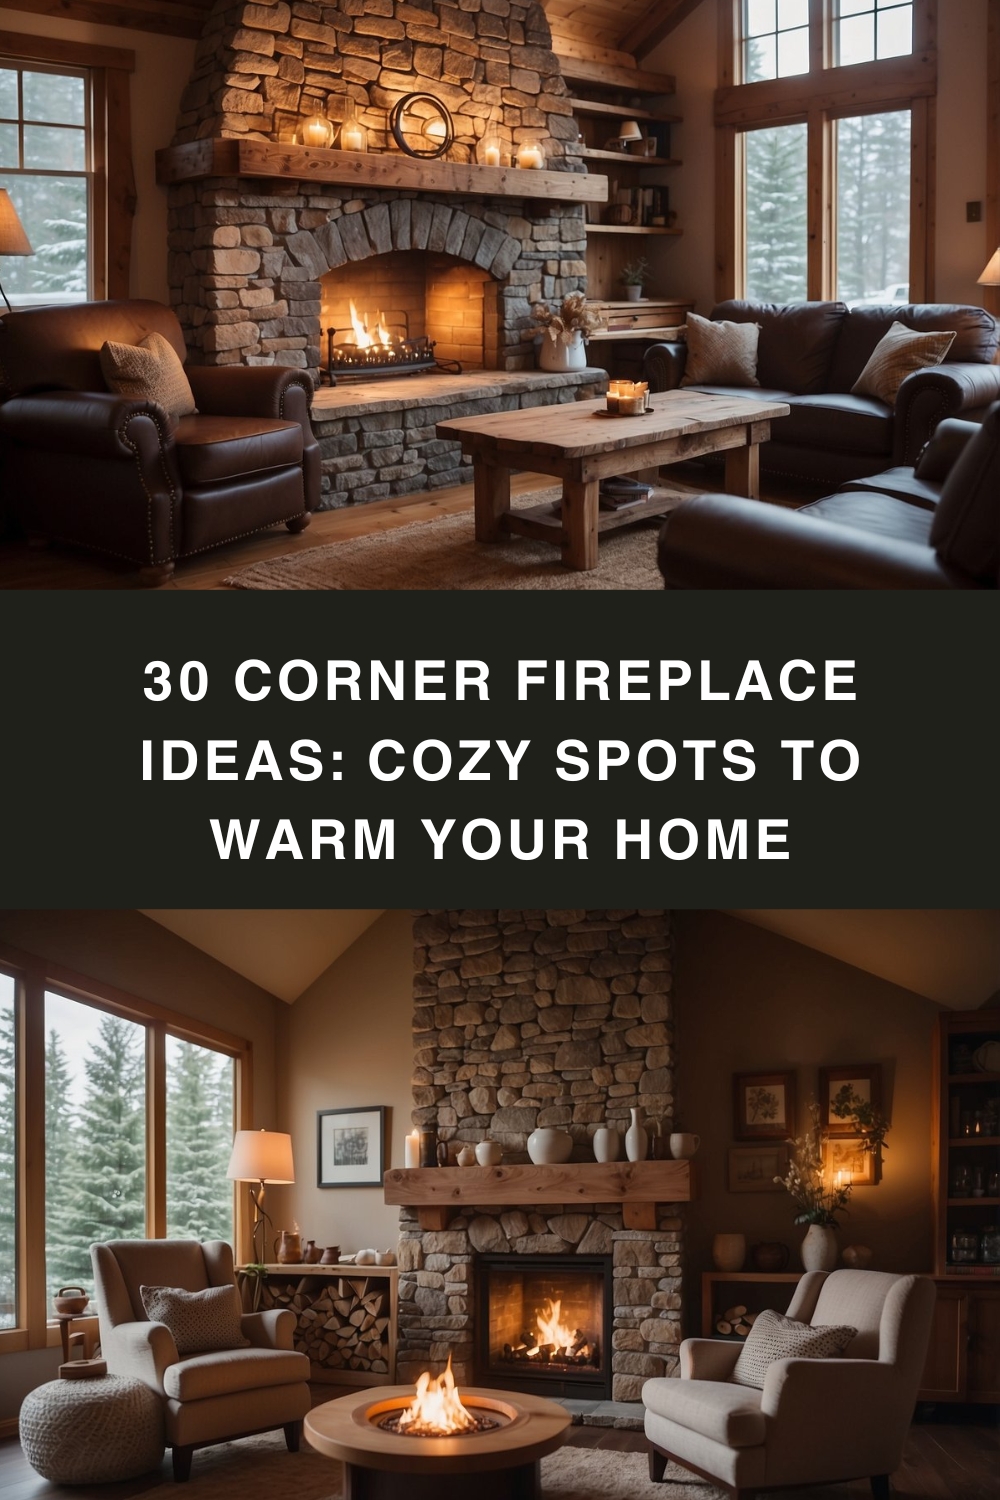 30 Corner Fireplace Ideas: Cozy Spots to Warm Your Home pin